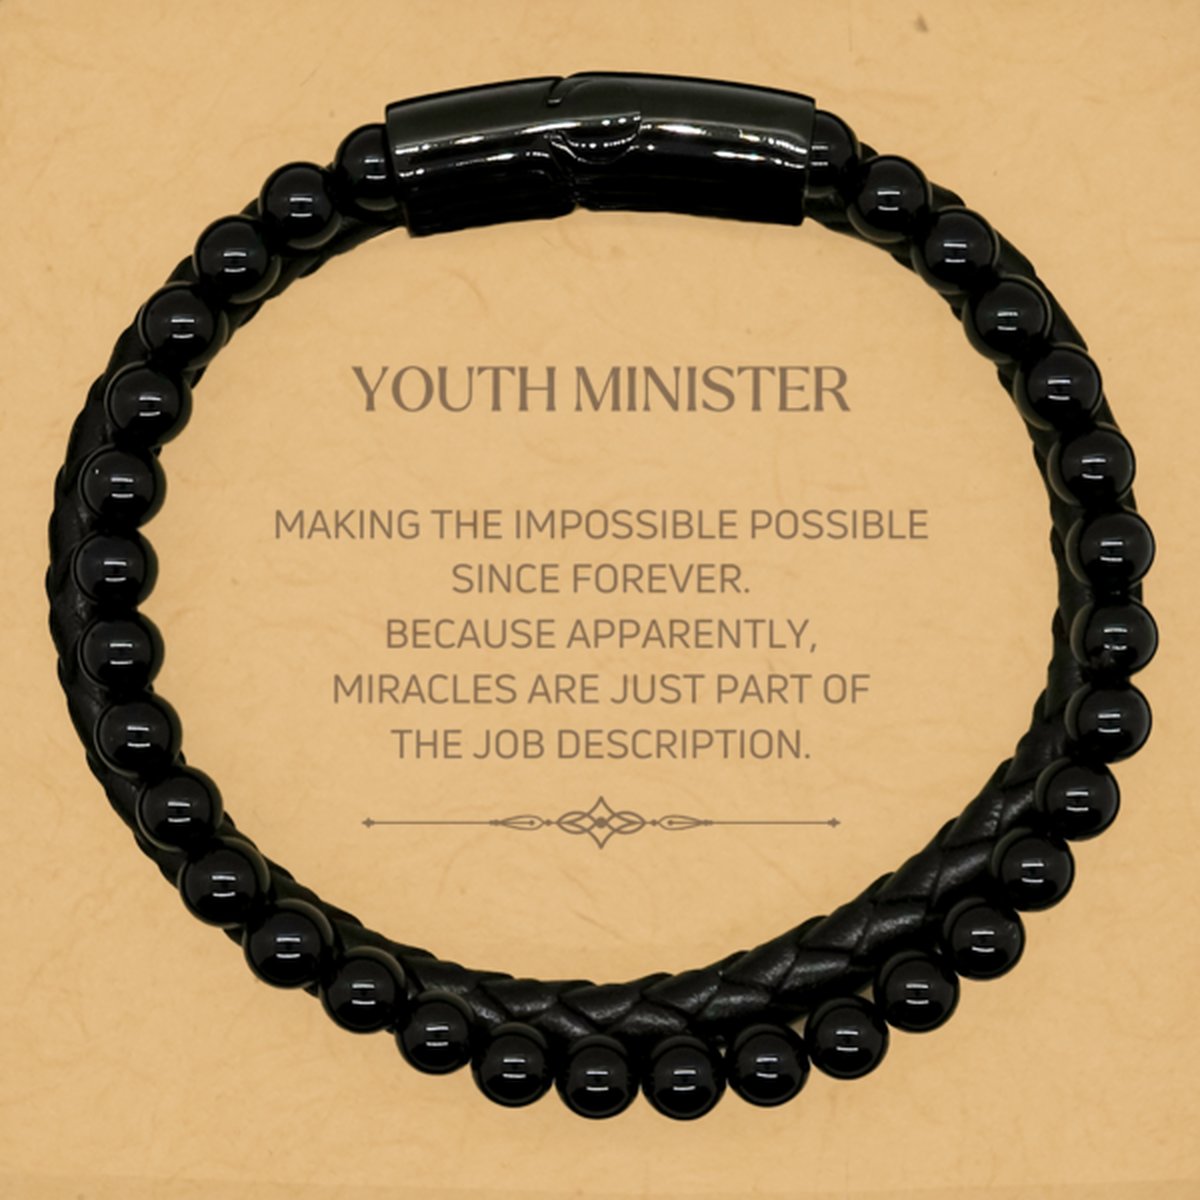 Funny Youth Minister Gifts, Miracles are just part of the job description, Inspirational Birthday Stone Leather Bracelets For Youth Minister, Men, Women, Coworkers, Friends, Boss